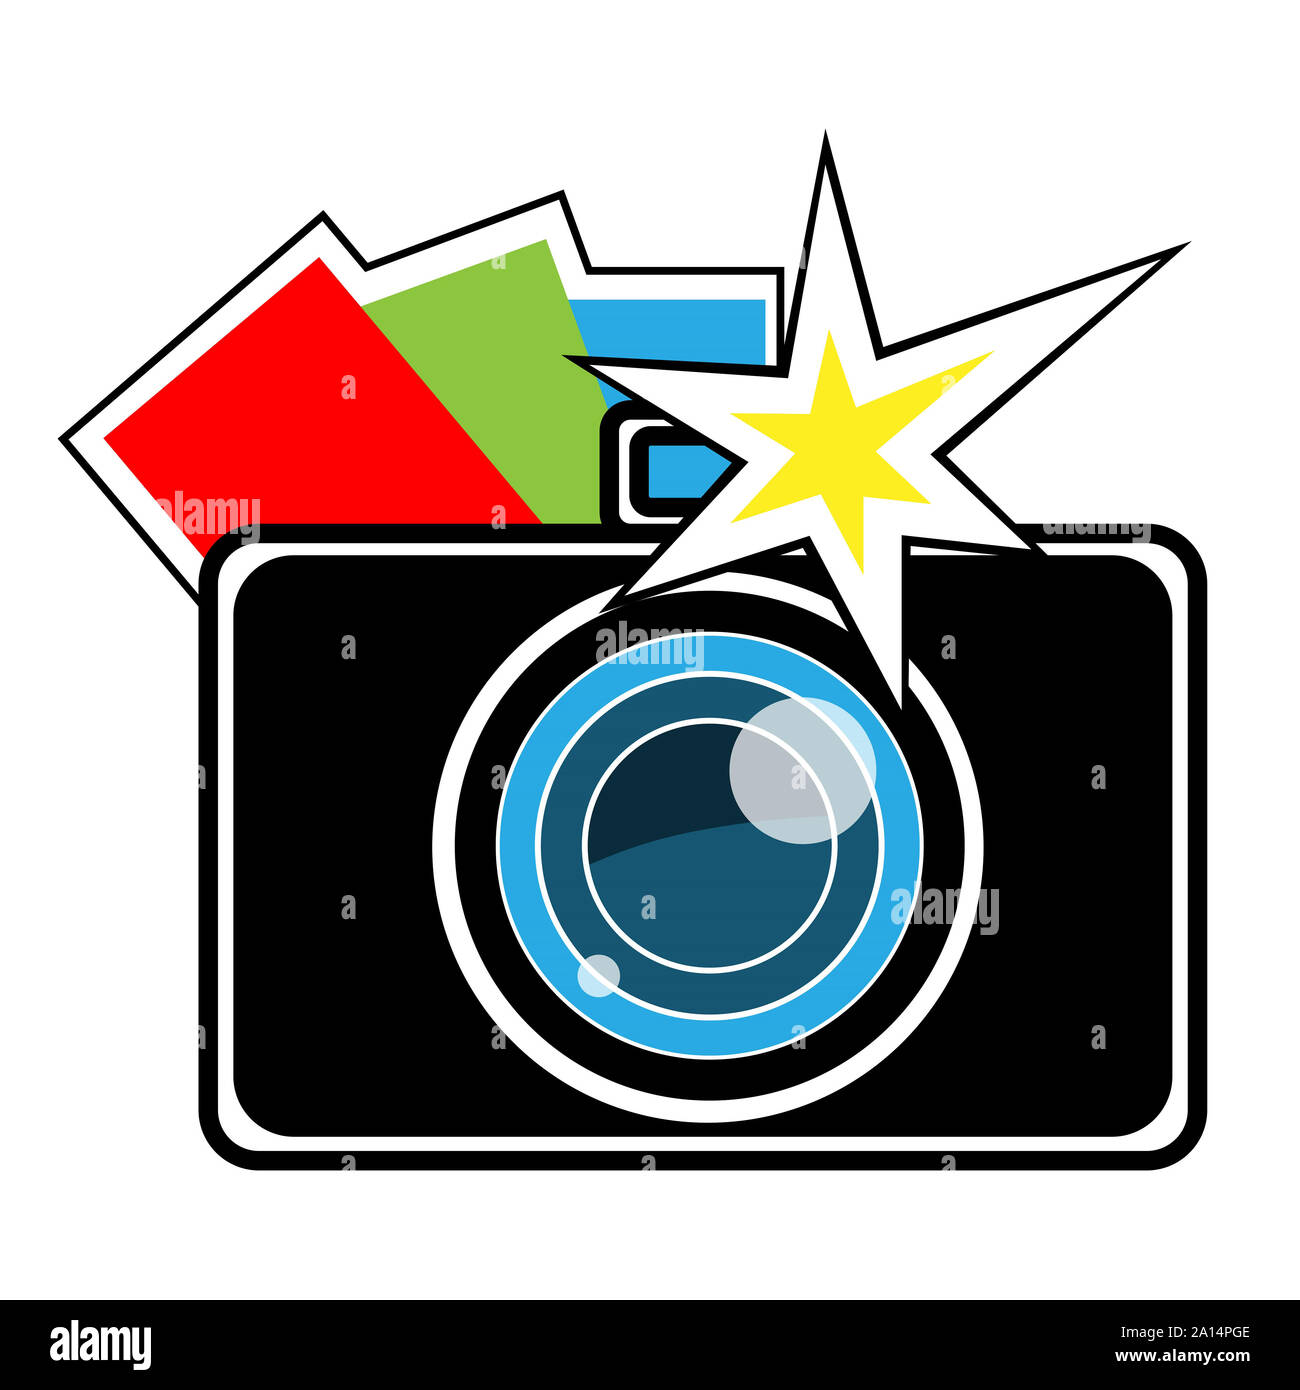 Camera logo Cut Out Stock Images & Pictures - Alamy